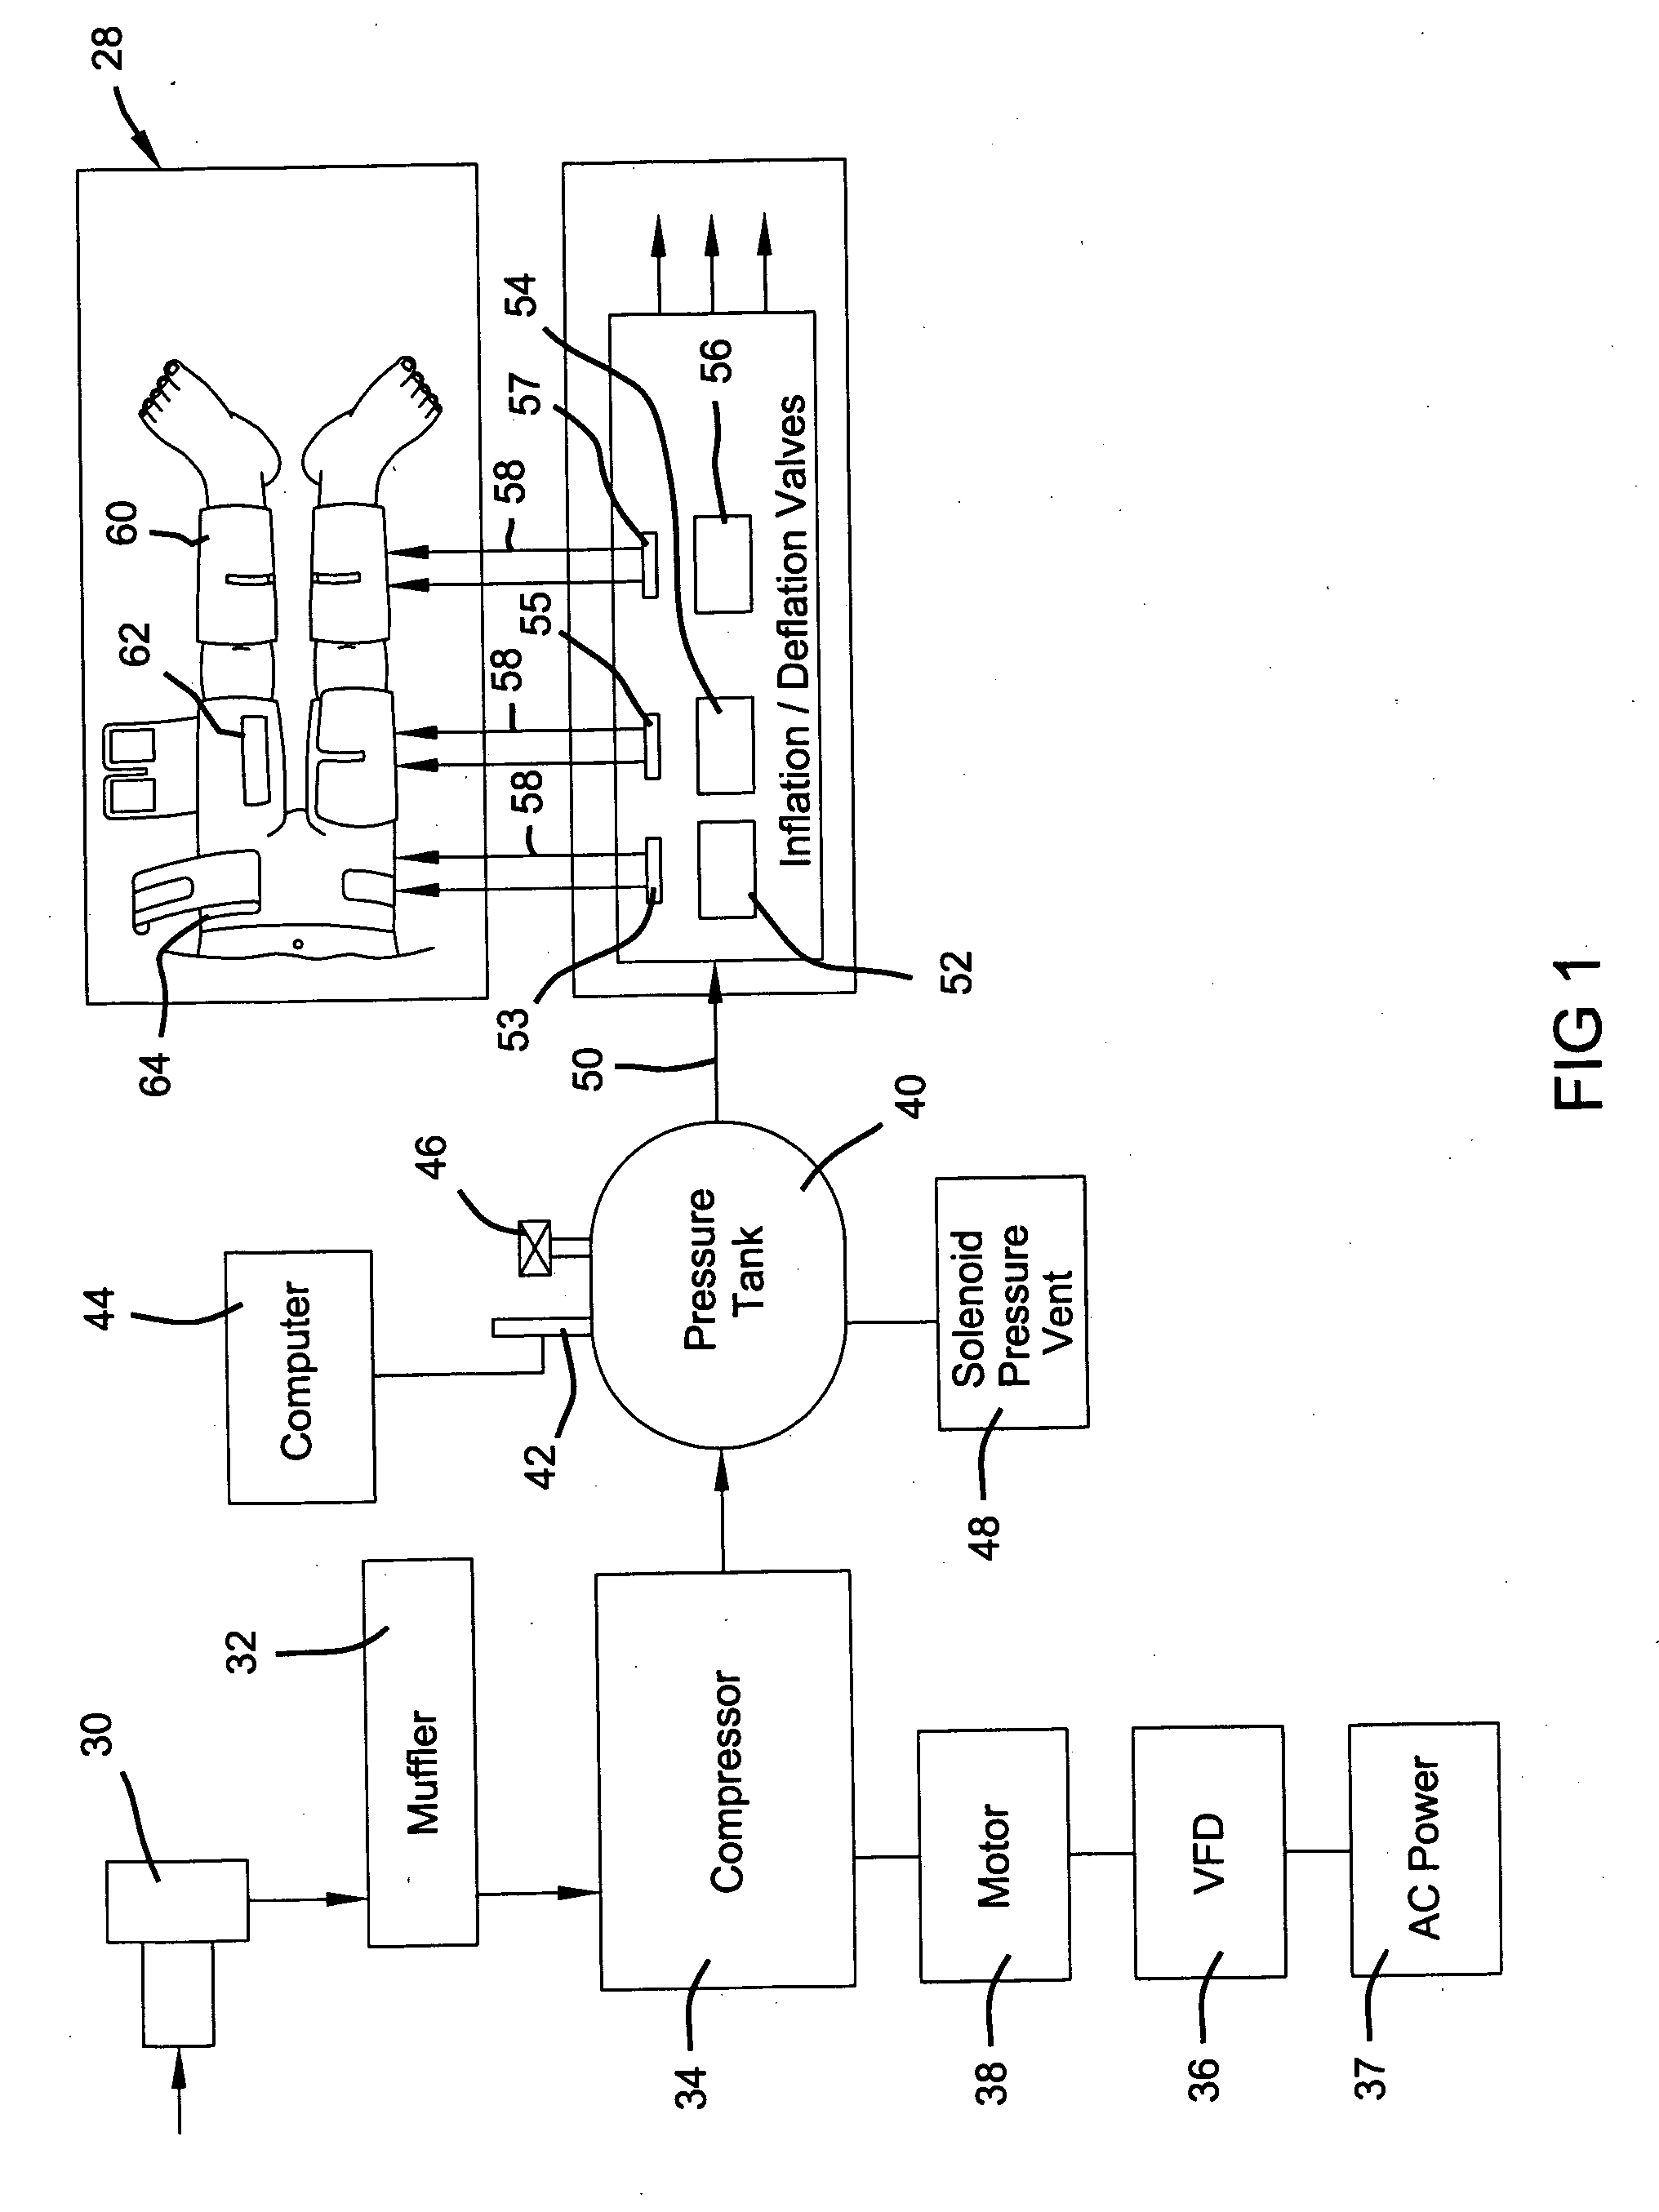 External counterpulsation device with multiple processors